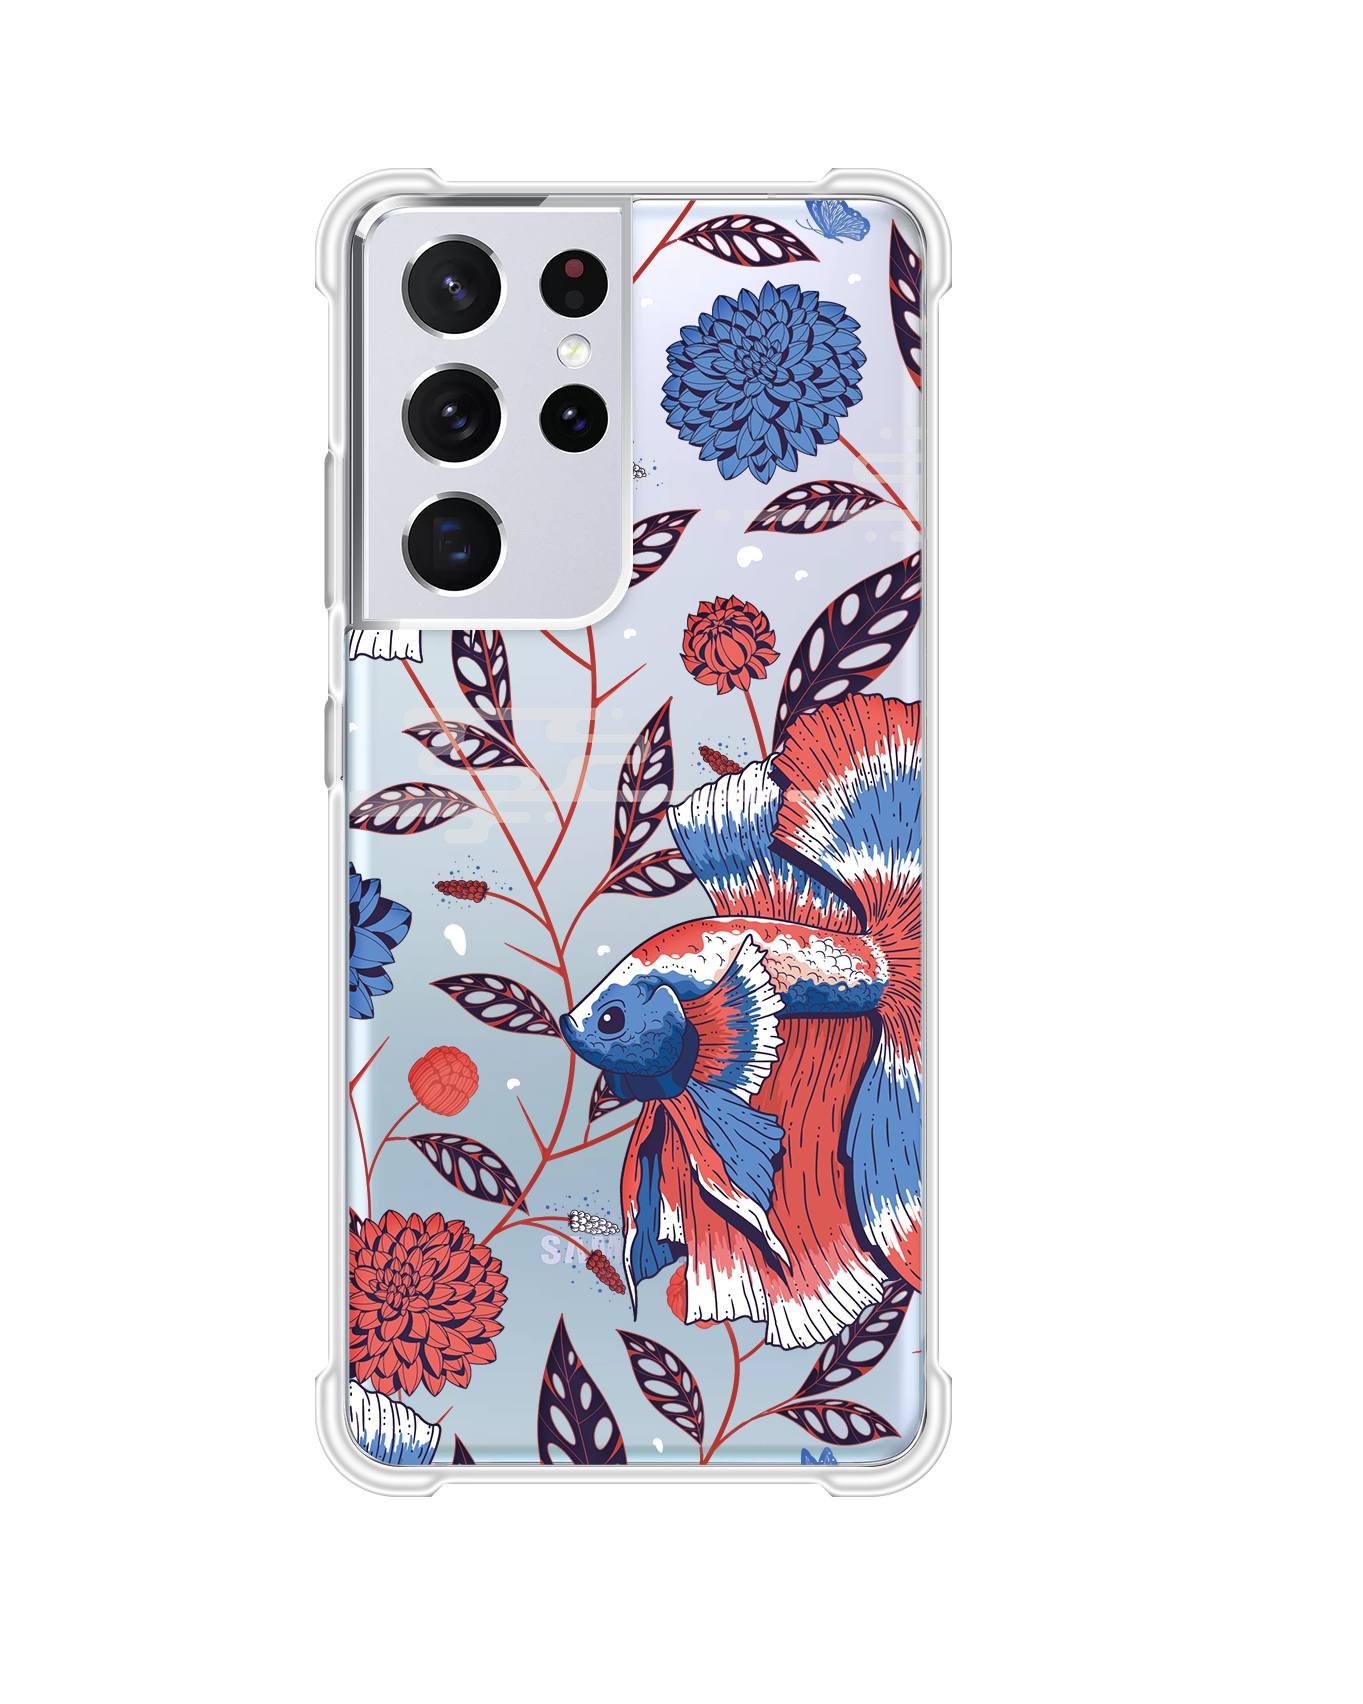 Android - Fish & Floral 2.0